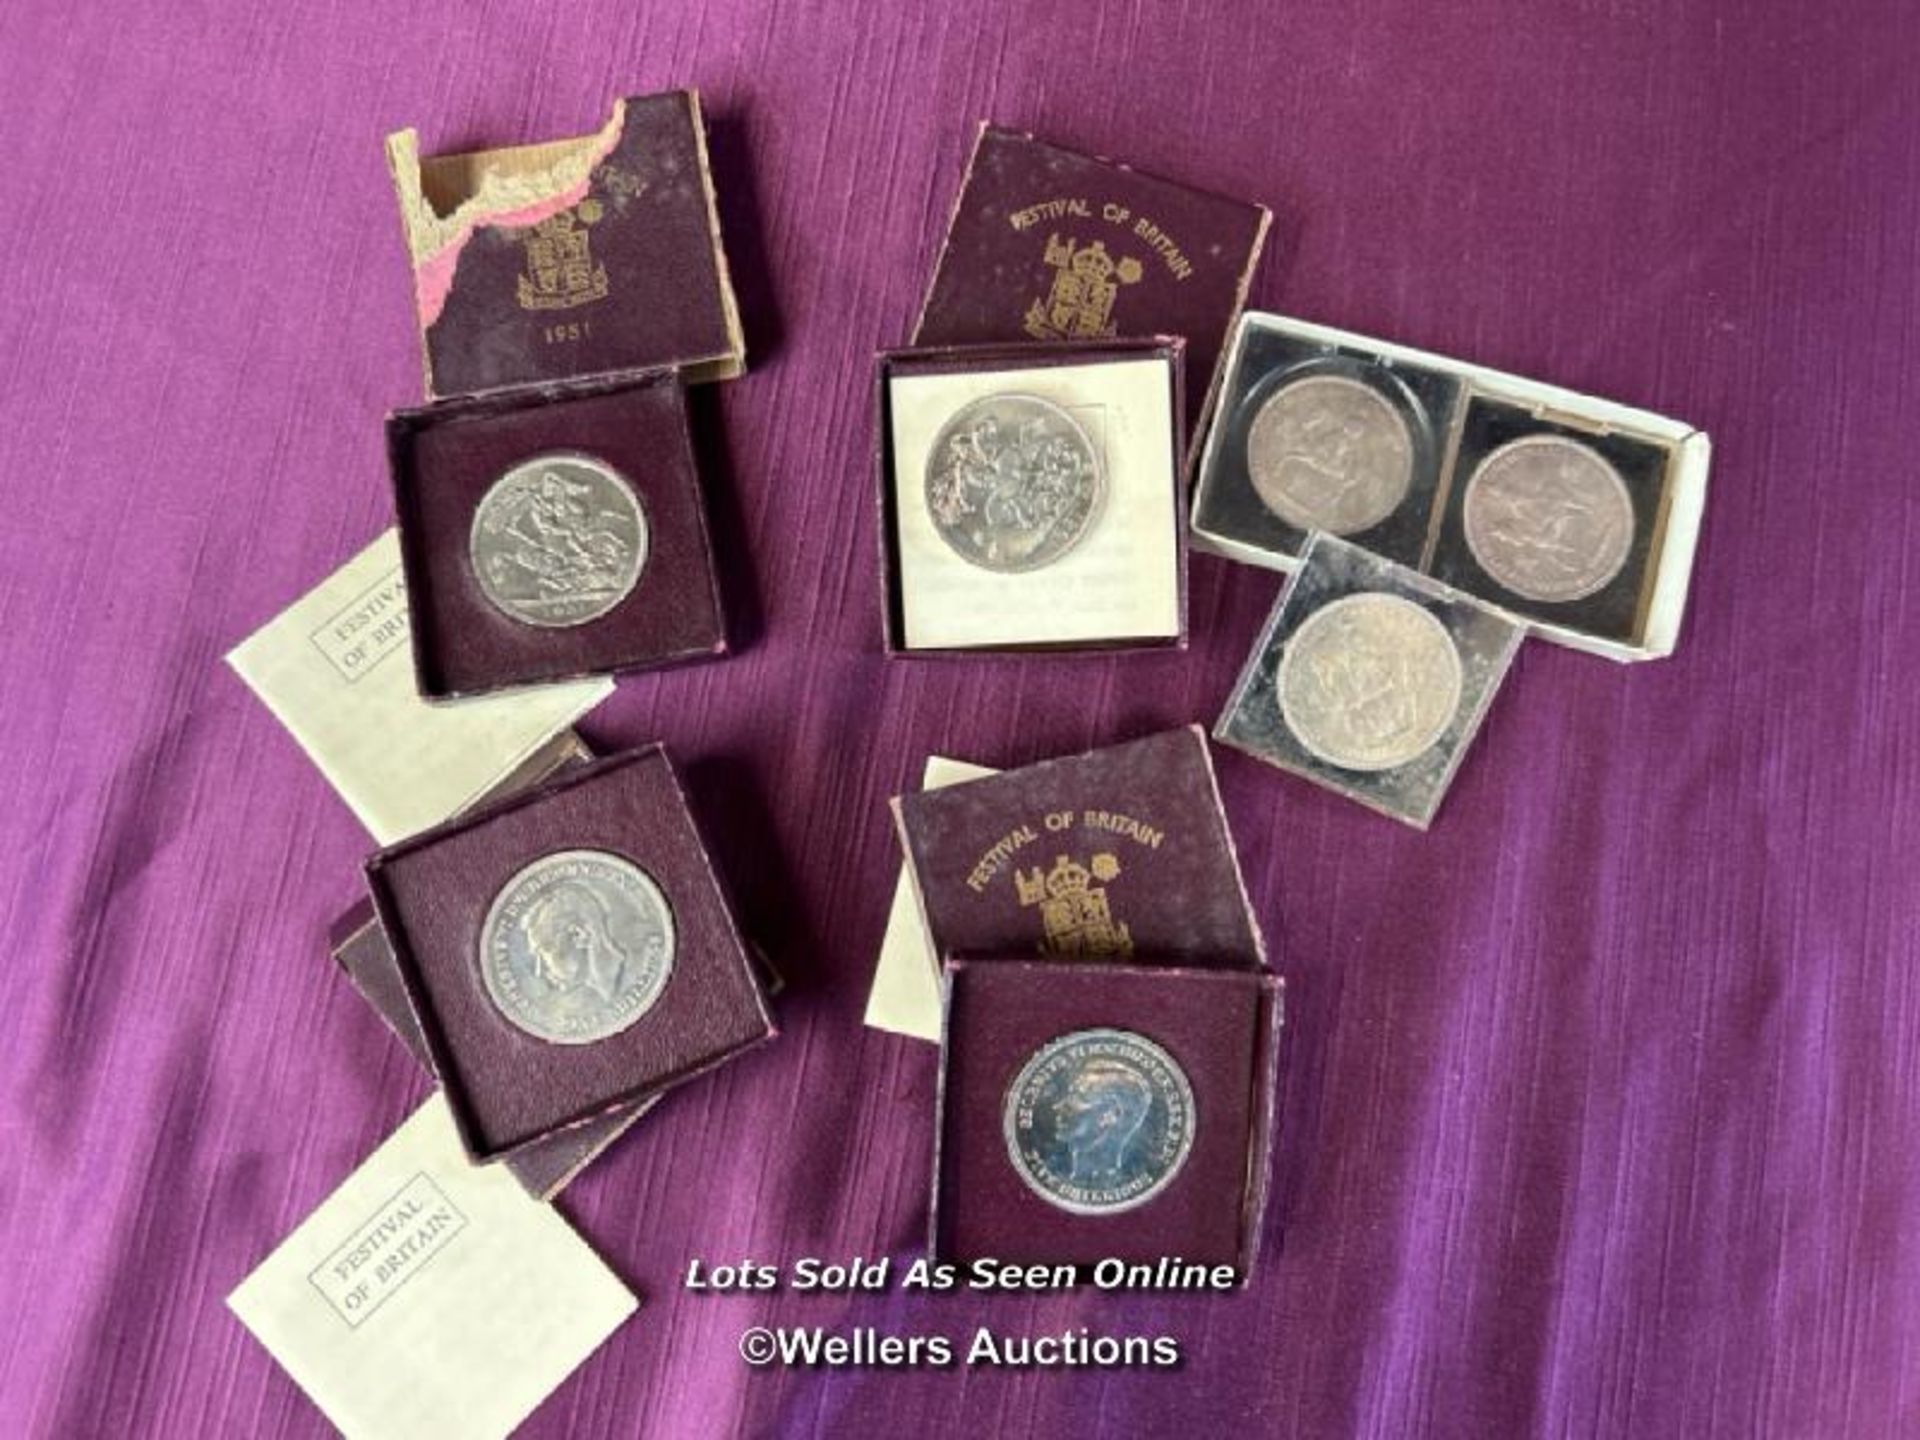 FOUR FESTIVAL OF BRITAIN 1951 COINS AND THREE QUEEN ELIZABETH FIVE SHILLING COINS